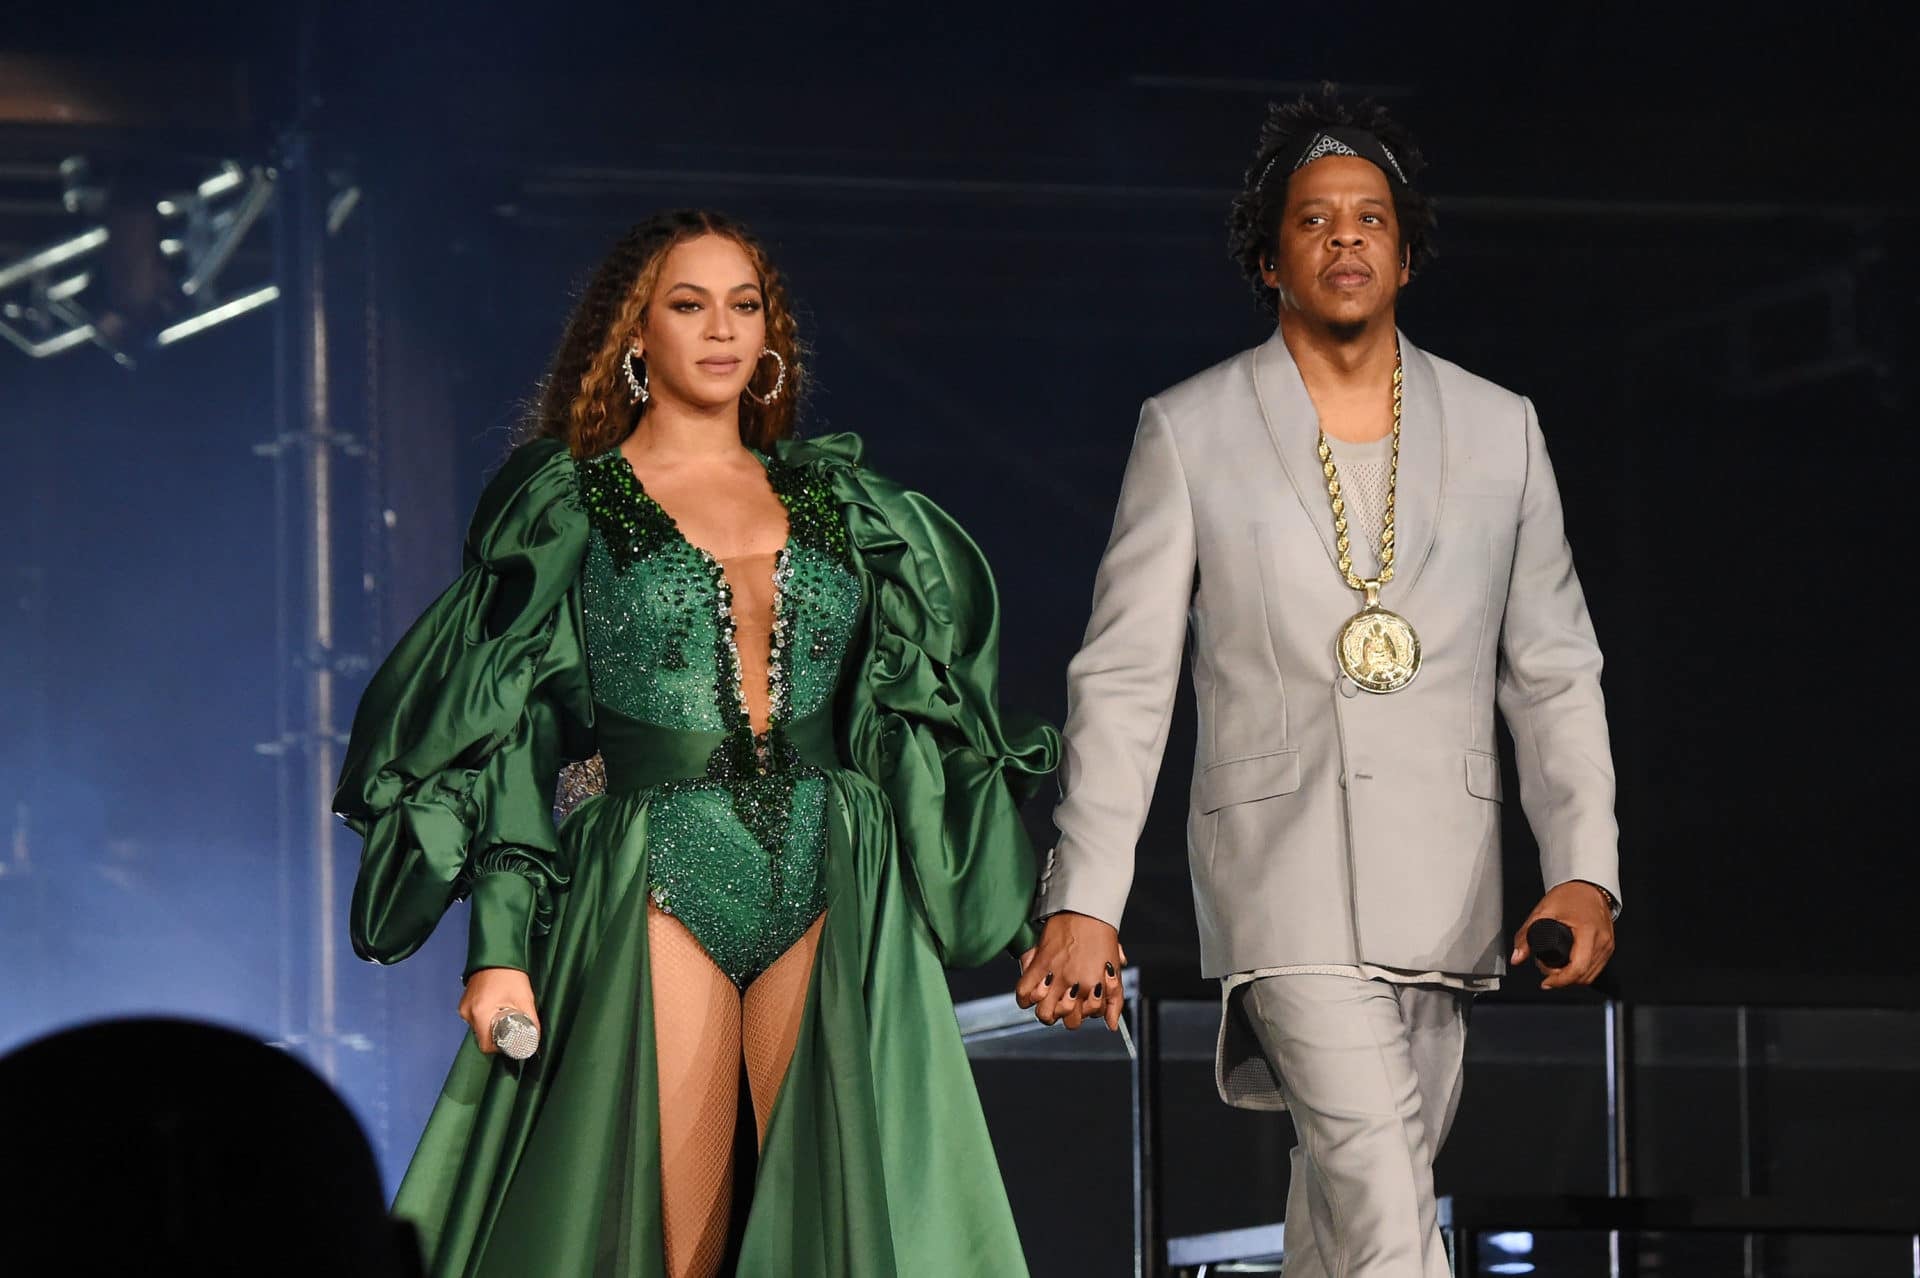 Would You Go Vegan For The Love Of Beyoncé and Jay-Z? The Couple Is Gifting A Lucky Fan With Lifelong Tickets